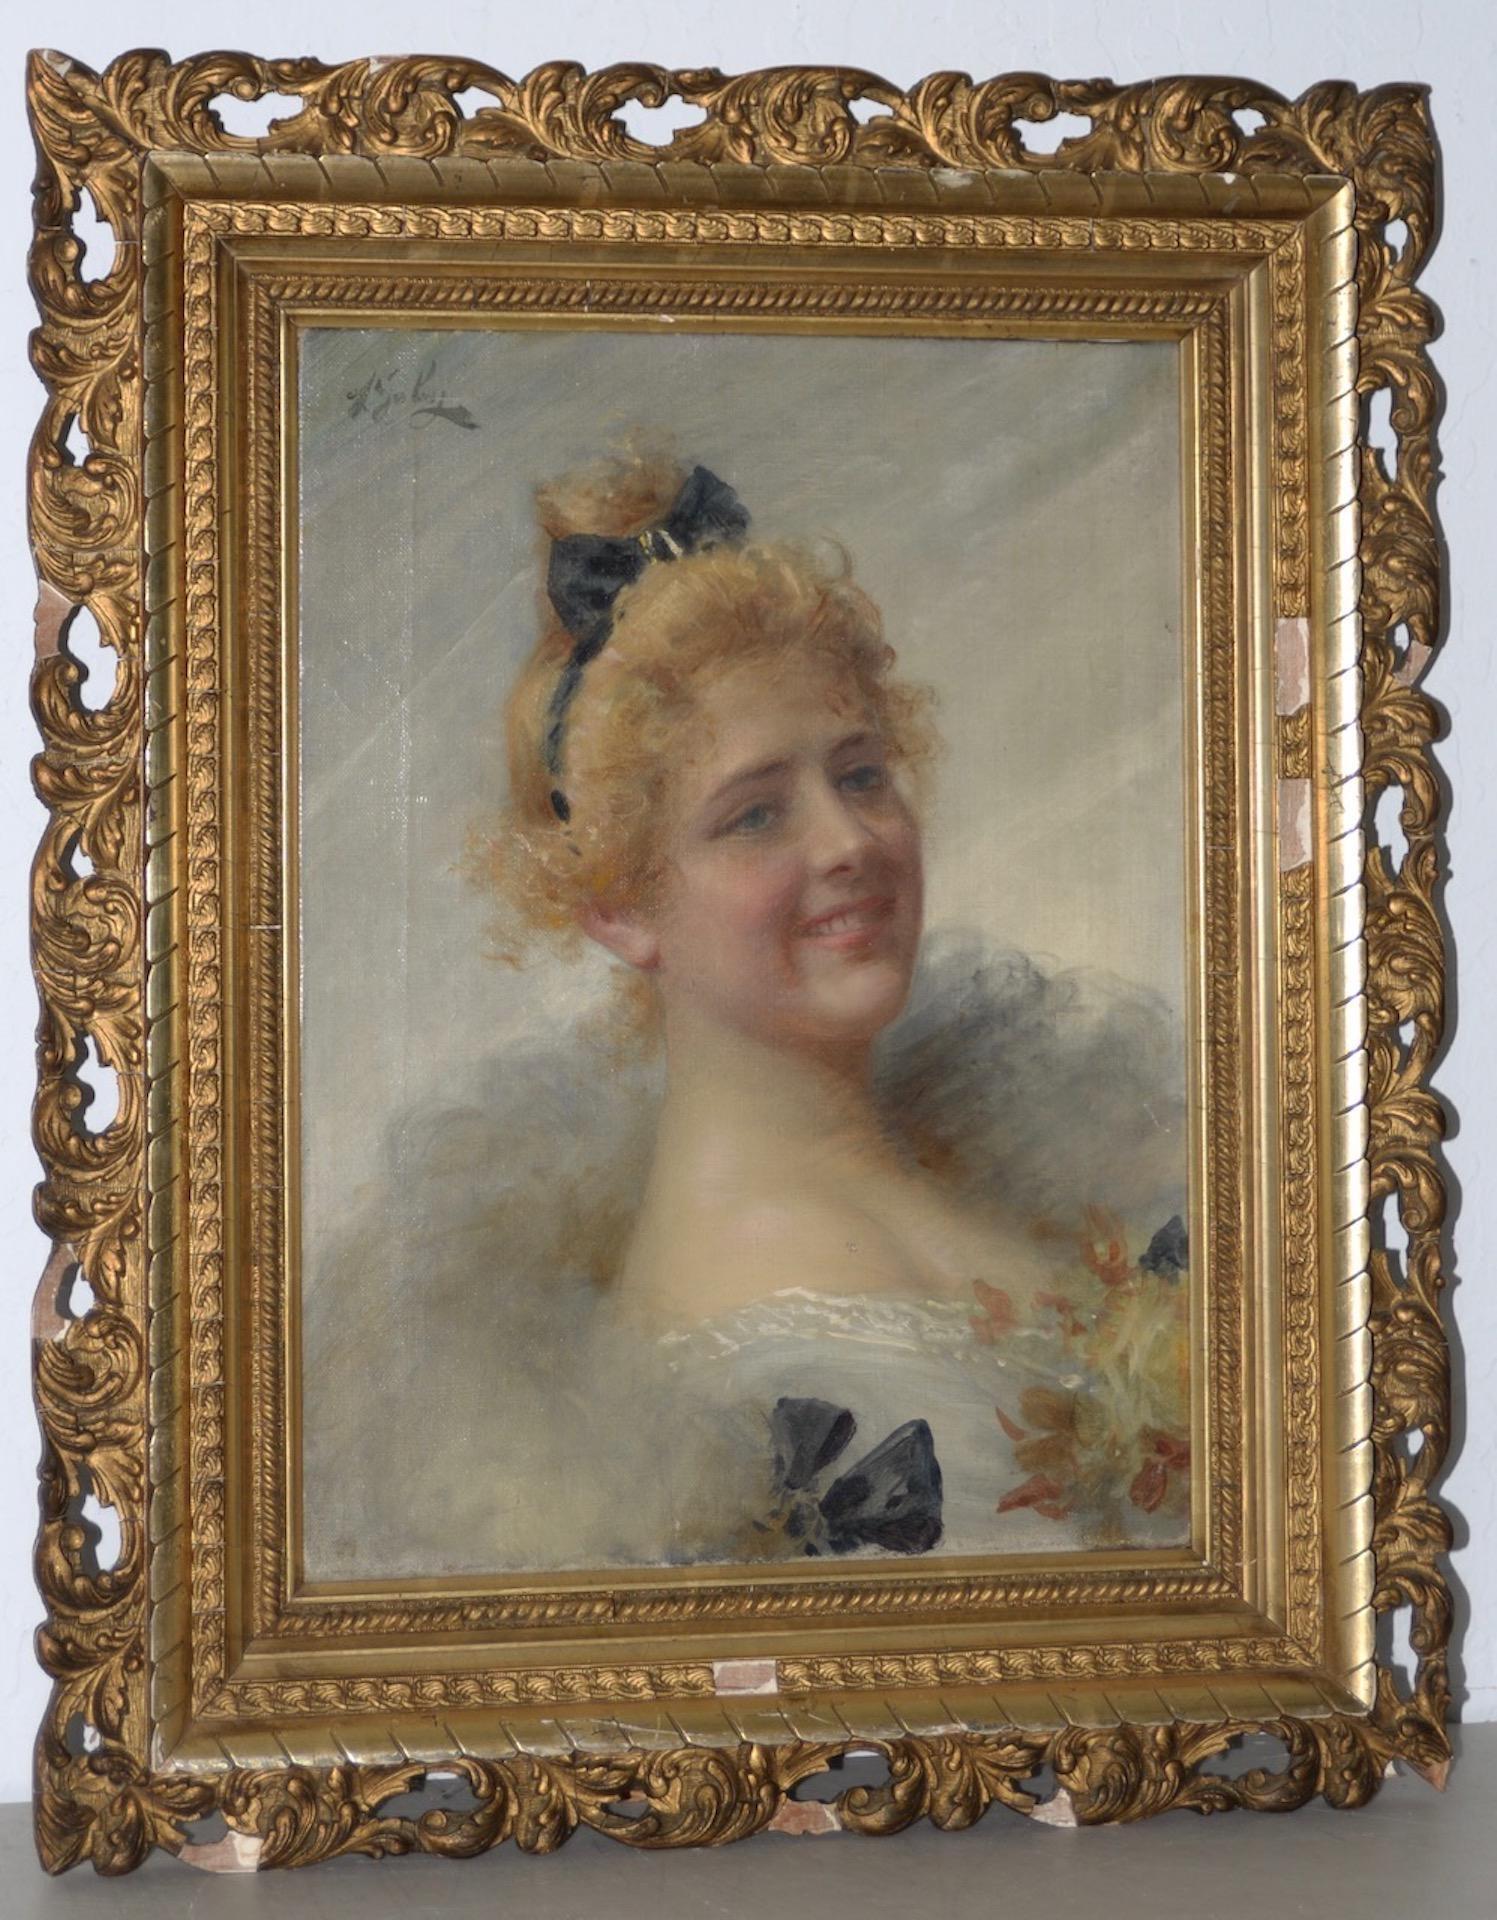 Portrait Of A Young Woman 